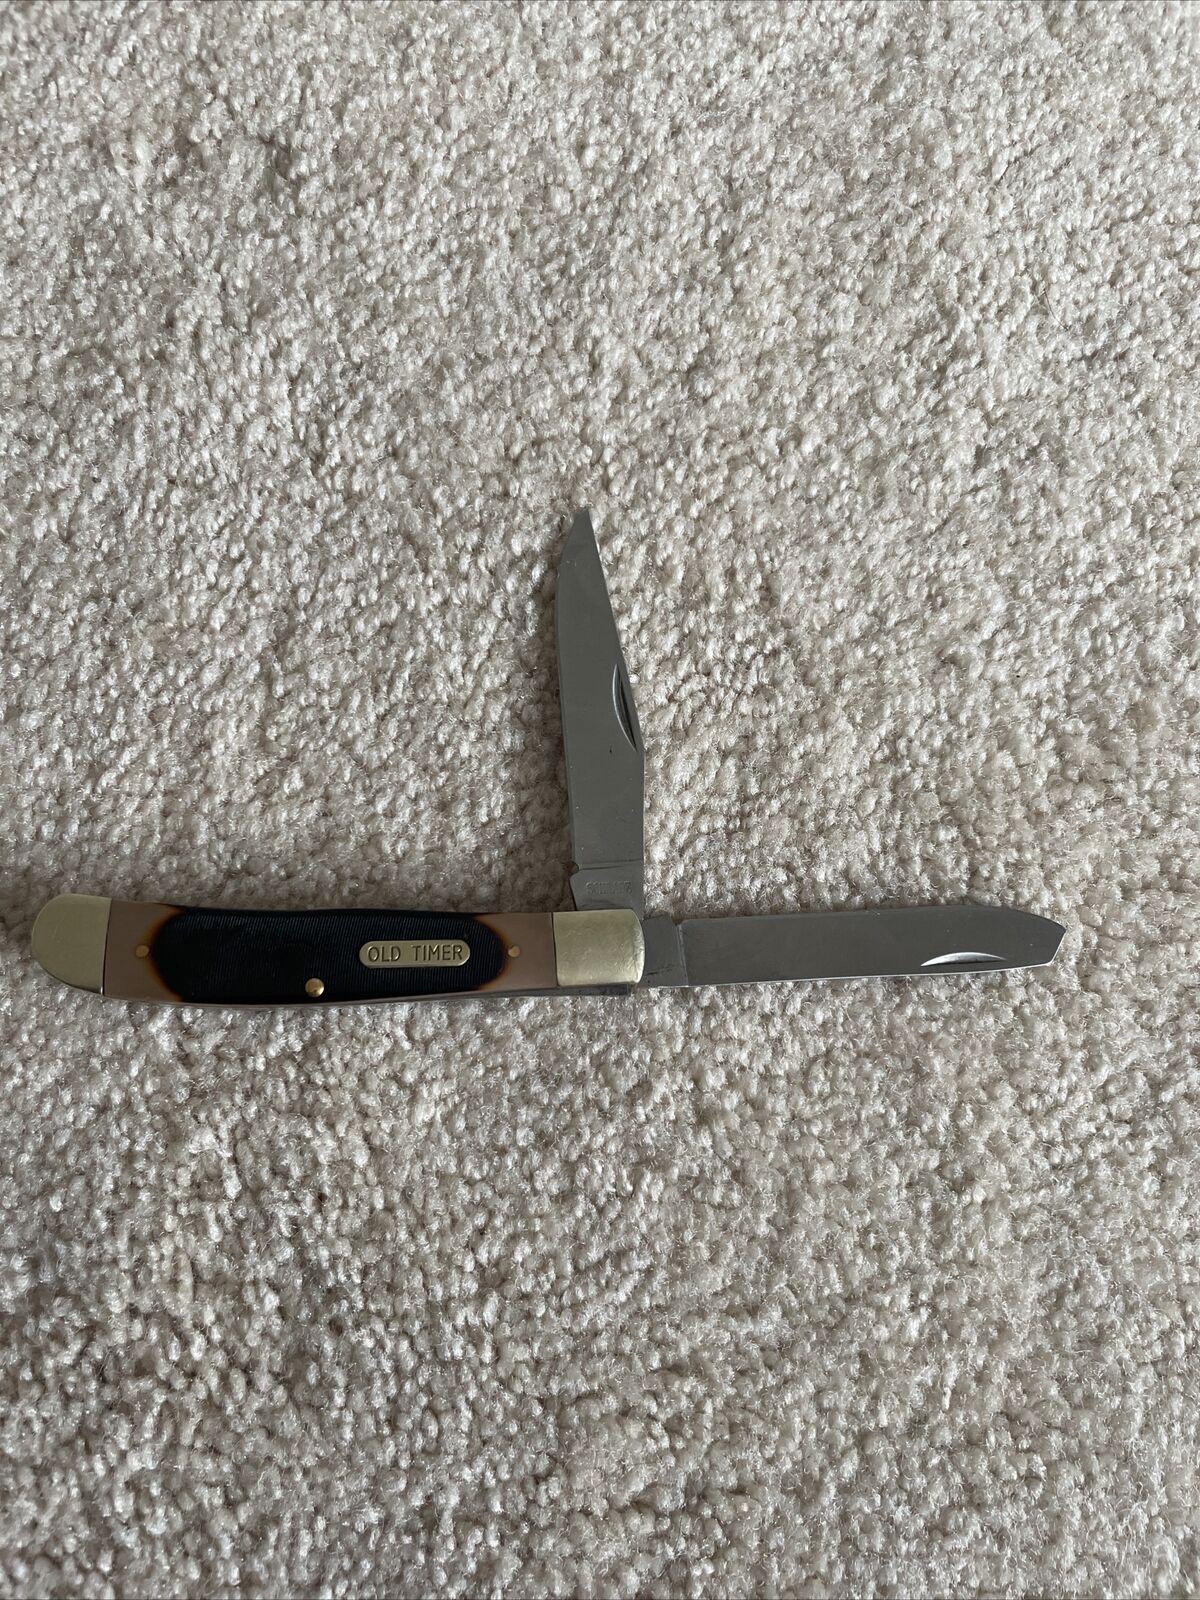 NEW OLD TIMER 940T TWO BLADE KNIFE \